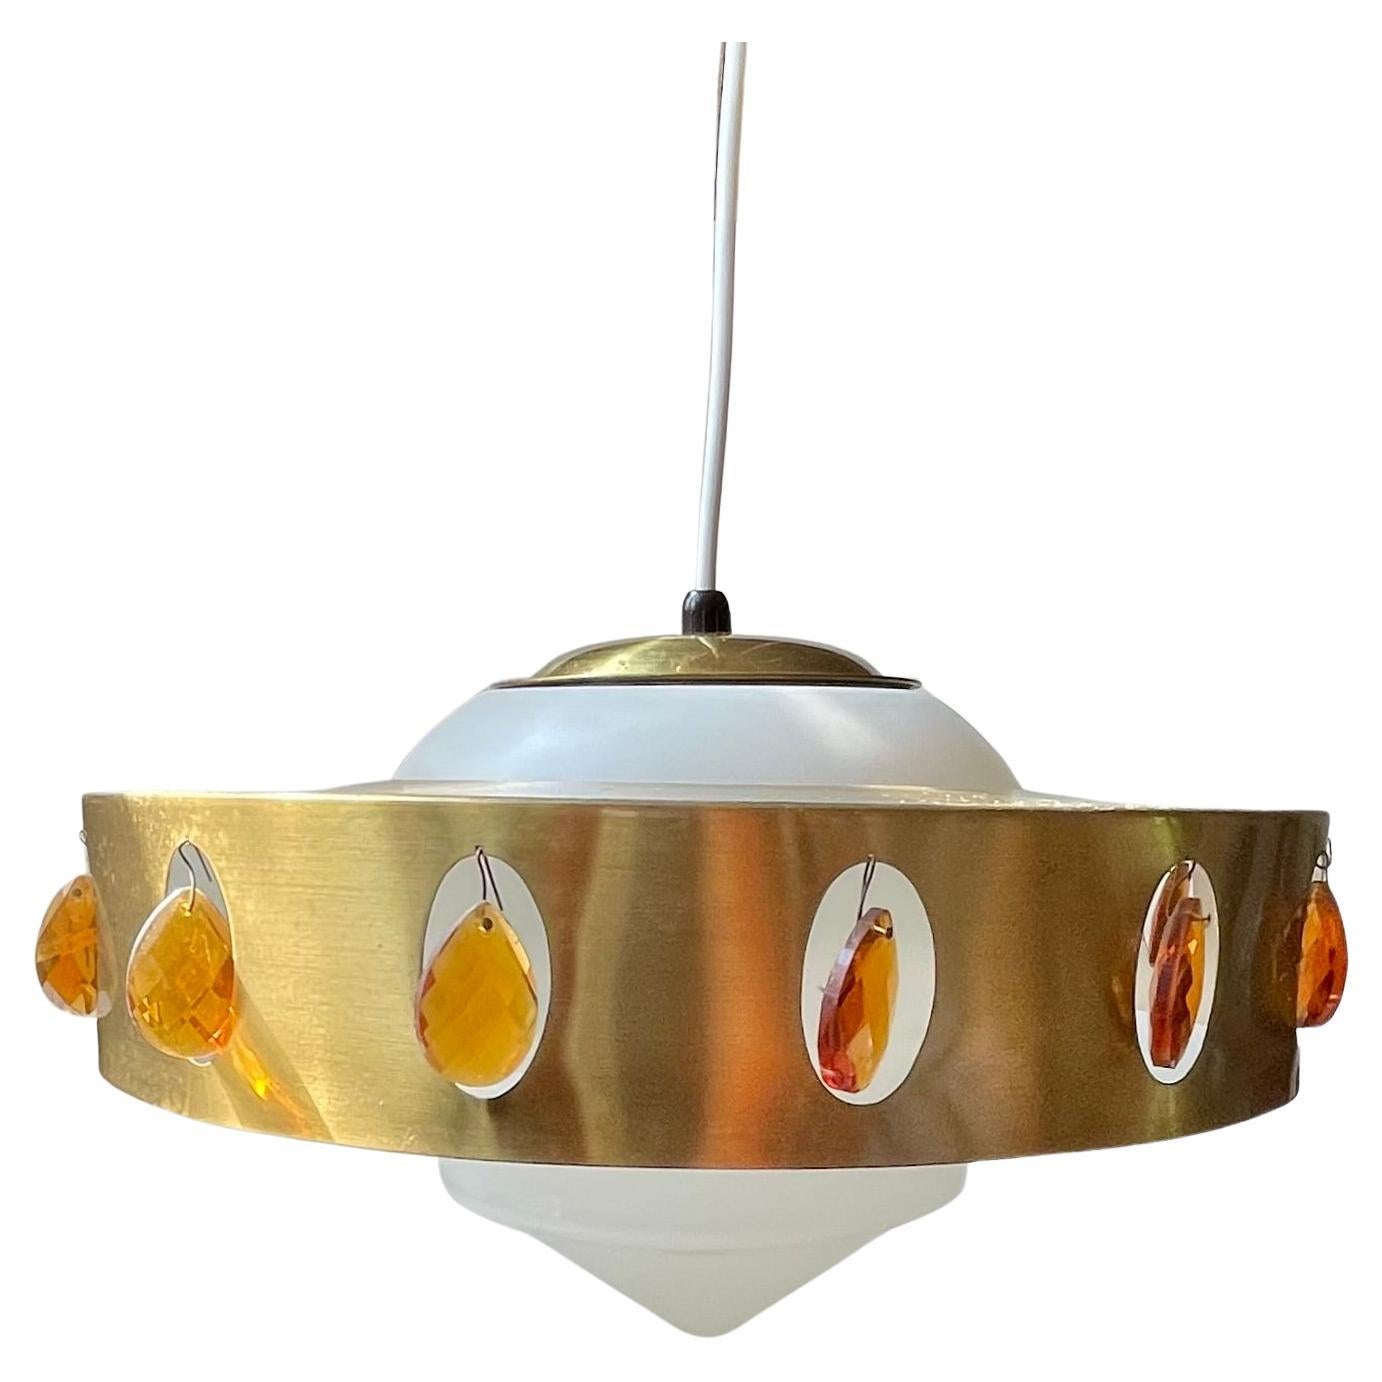 Unusual swag style pendant chandelier consisting of a 'spinner shaped' opaline glass shade topped with a solid brass shade decorated with orange prisms. Possibly made by Vitrika in Denmark circa 1970. Measurements: H: 25 cm, Diameter: 36 cm.